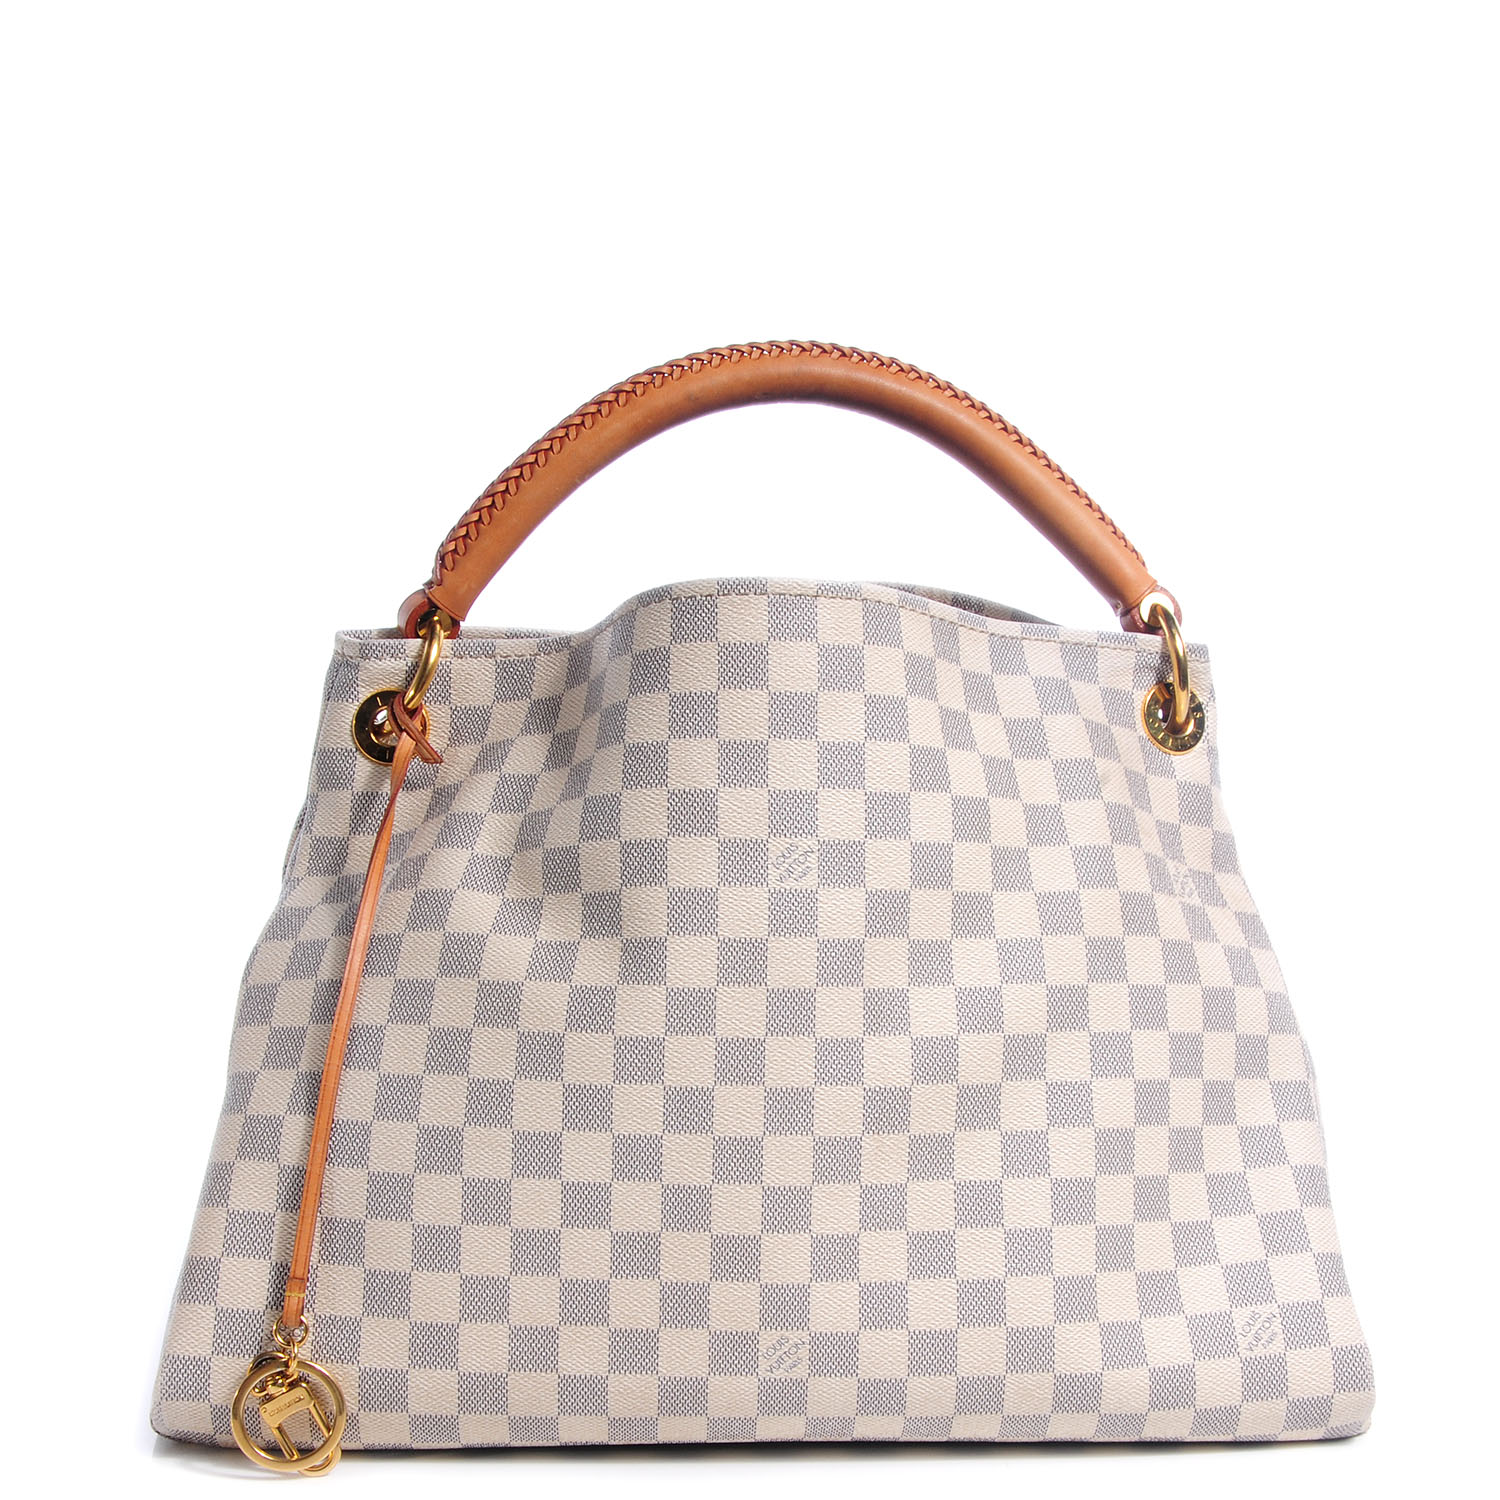 LOUIS VUITTON, Artsy in white leather at 1stDibs  lv artsy white, white  artsy louis vuitton, louis vuitton artsy white leather